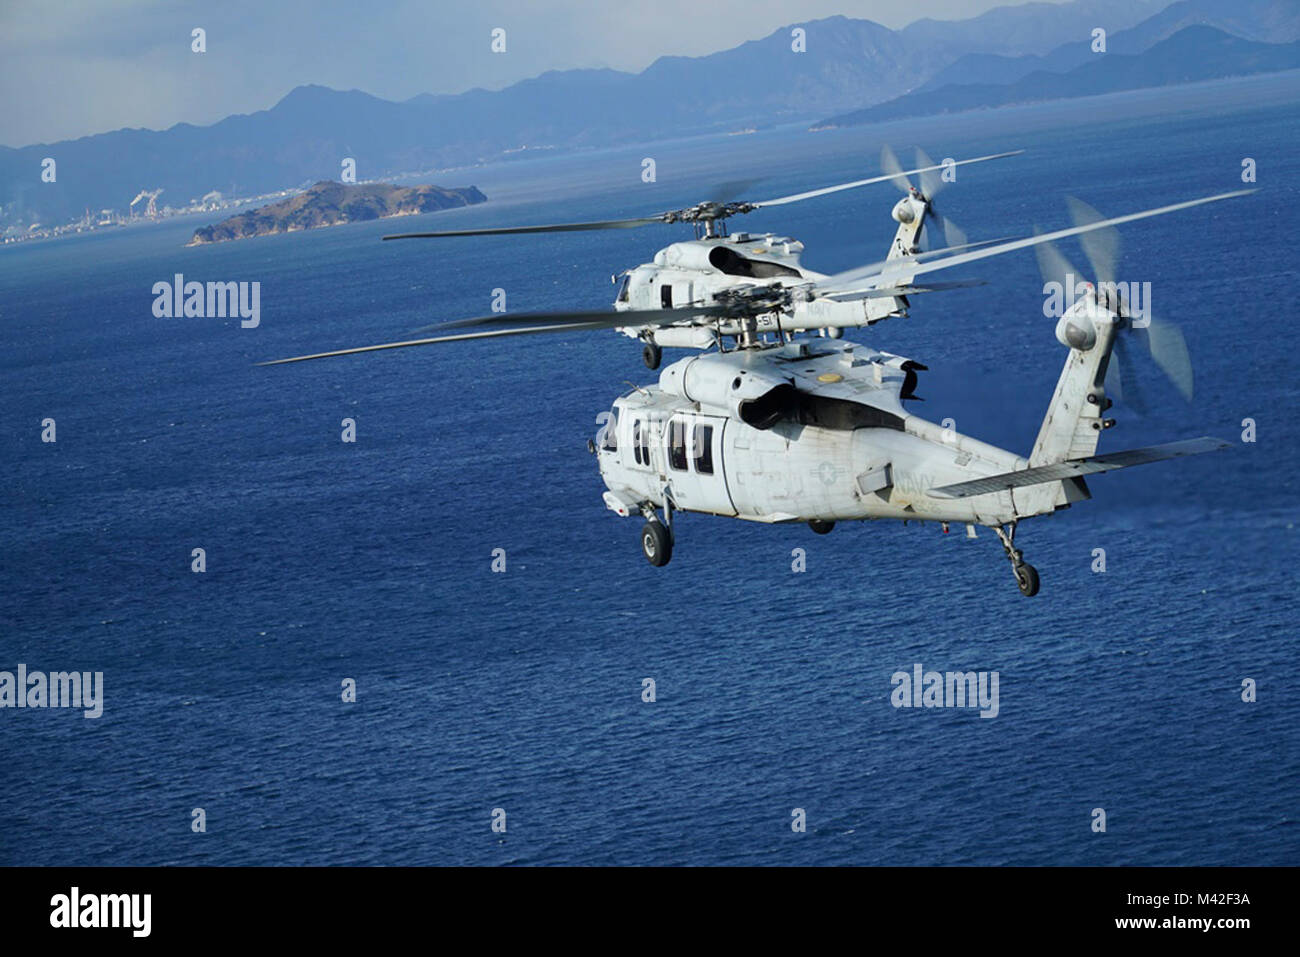 HIROSHIMA, Japan (Jan. 25, 2018) U.S. Navy MH-60R and MH-60S Seahawk helicopters, assigned to Helicopter Maritime Strike Squadron (HSM) 51 and Helicopter Sea Combat Squadron (HSC) 25 rendezvous off the coast of Hiroshima following a Strike Coordination and Reconnaissance training mission from Marine Corps Air Station Iwakuni. Forward-deployed to Naval Air Facility Atsugi, HSC 25’s Detachment 6 conducted several training while in Iwakuni to meet with F-35B Joint Strike Fighter pilots of Marine Fighter Attack Squadron 121 (VMFA-121). The flights with HSM 51 were meant to enhance surface warfare  Stock Photo